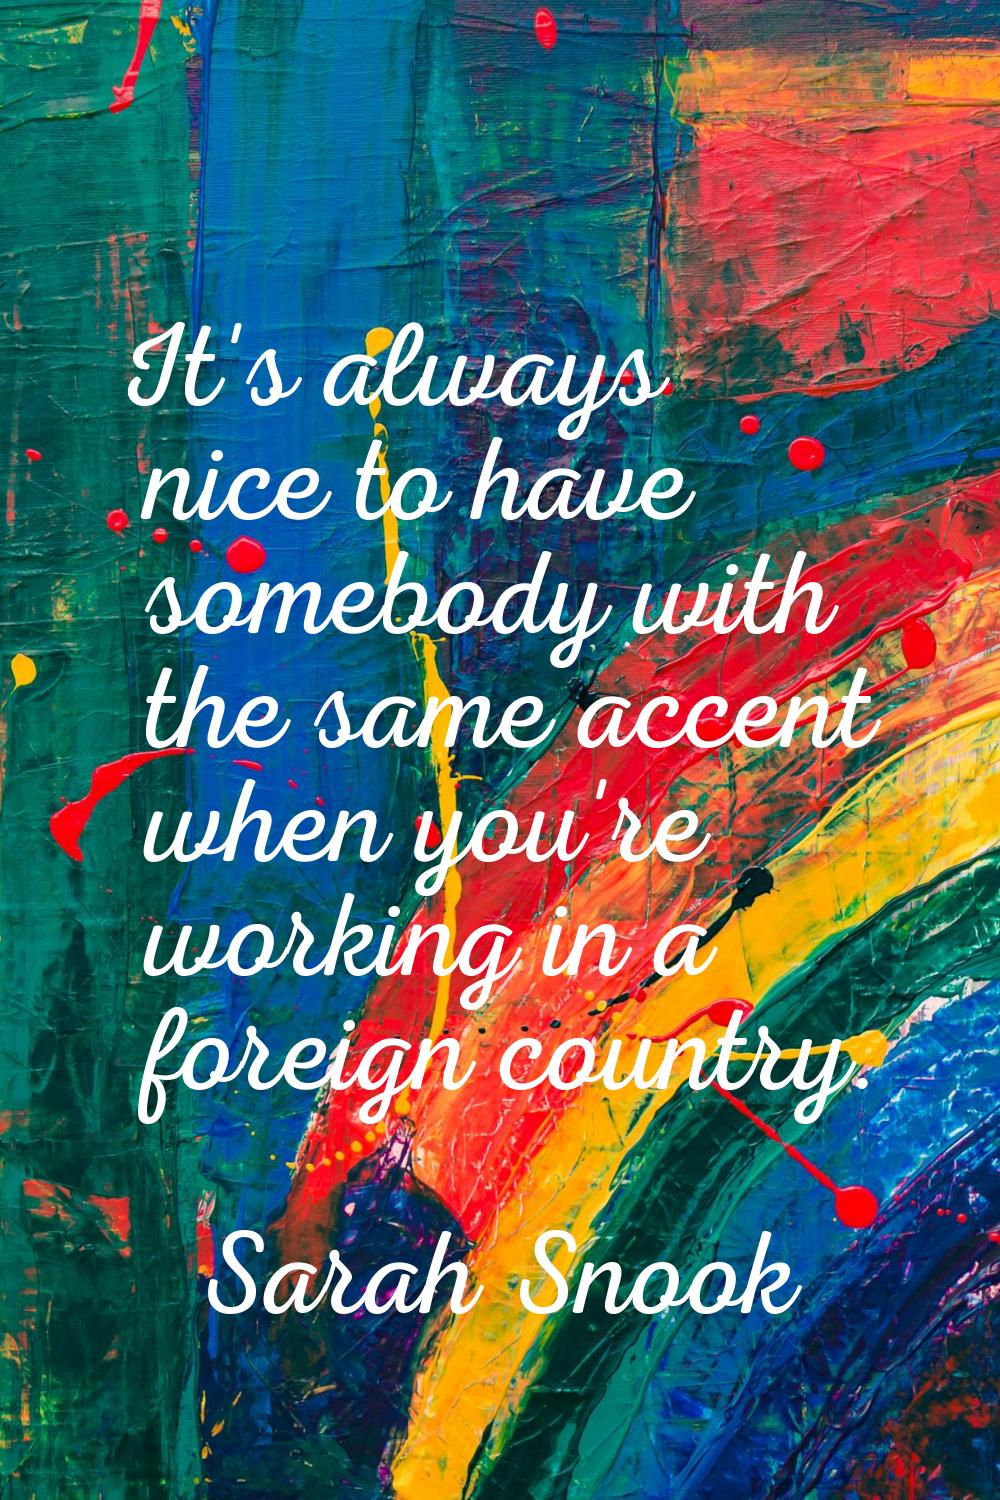 It's always nice to have somebody with the same accent when you're working in a foreign country.